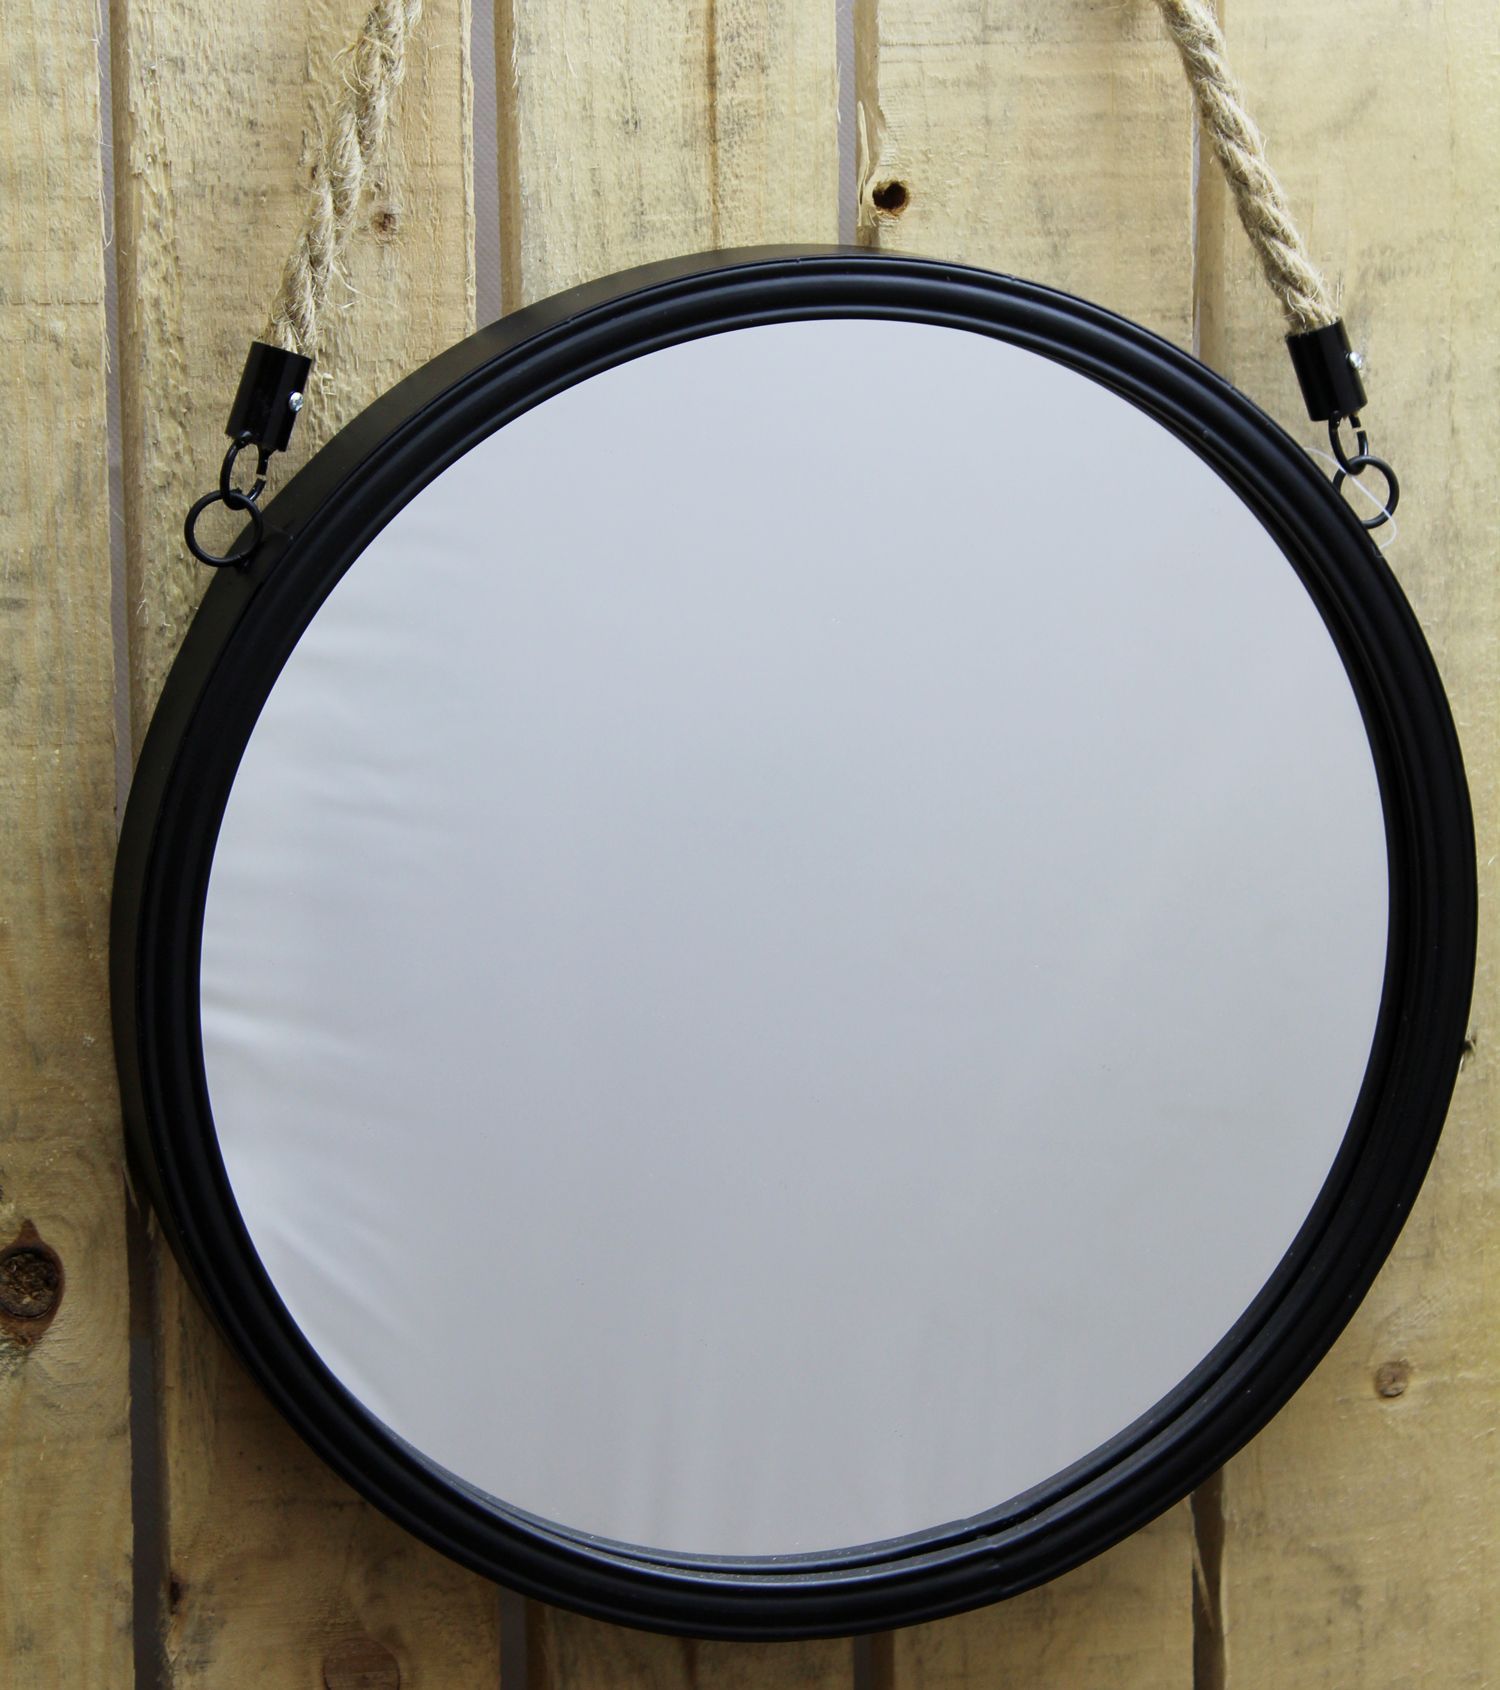 Black Round Metal Hanging Wall Mirror With Rope Handle 30cm | Ebay Within Black Round Wall Mirrors (View 7 of 15)